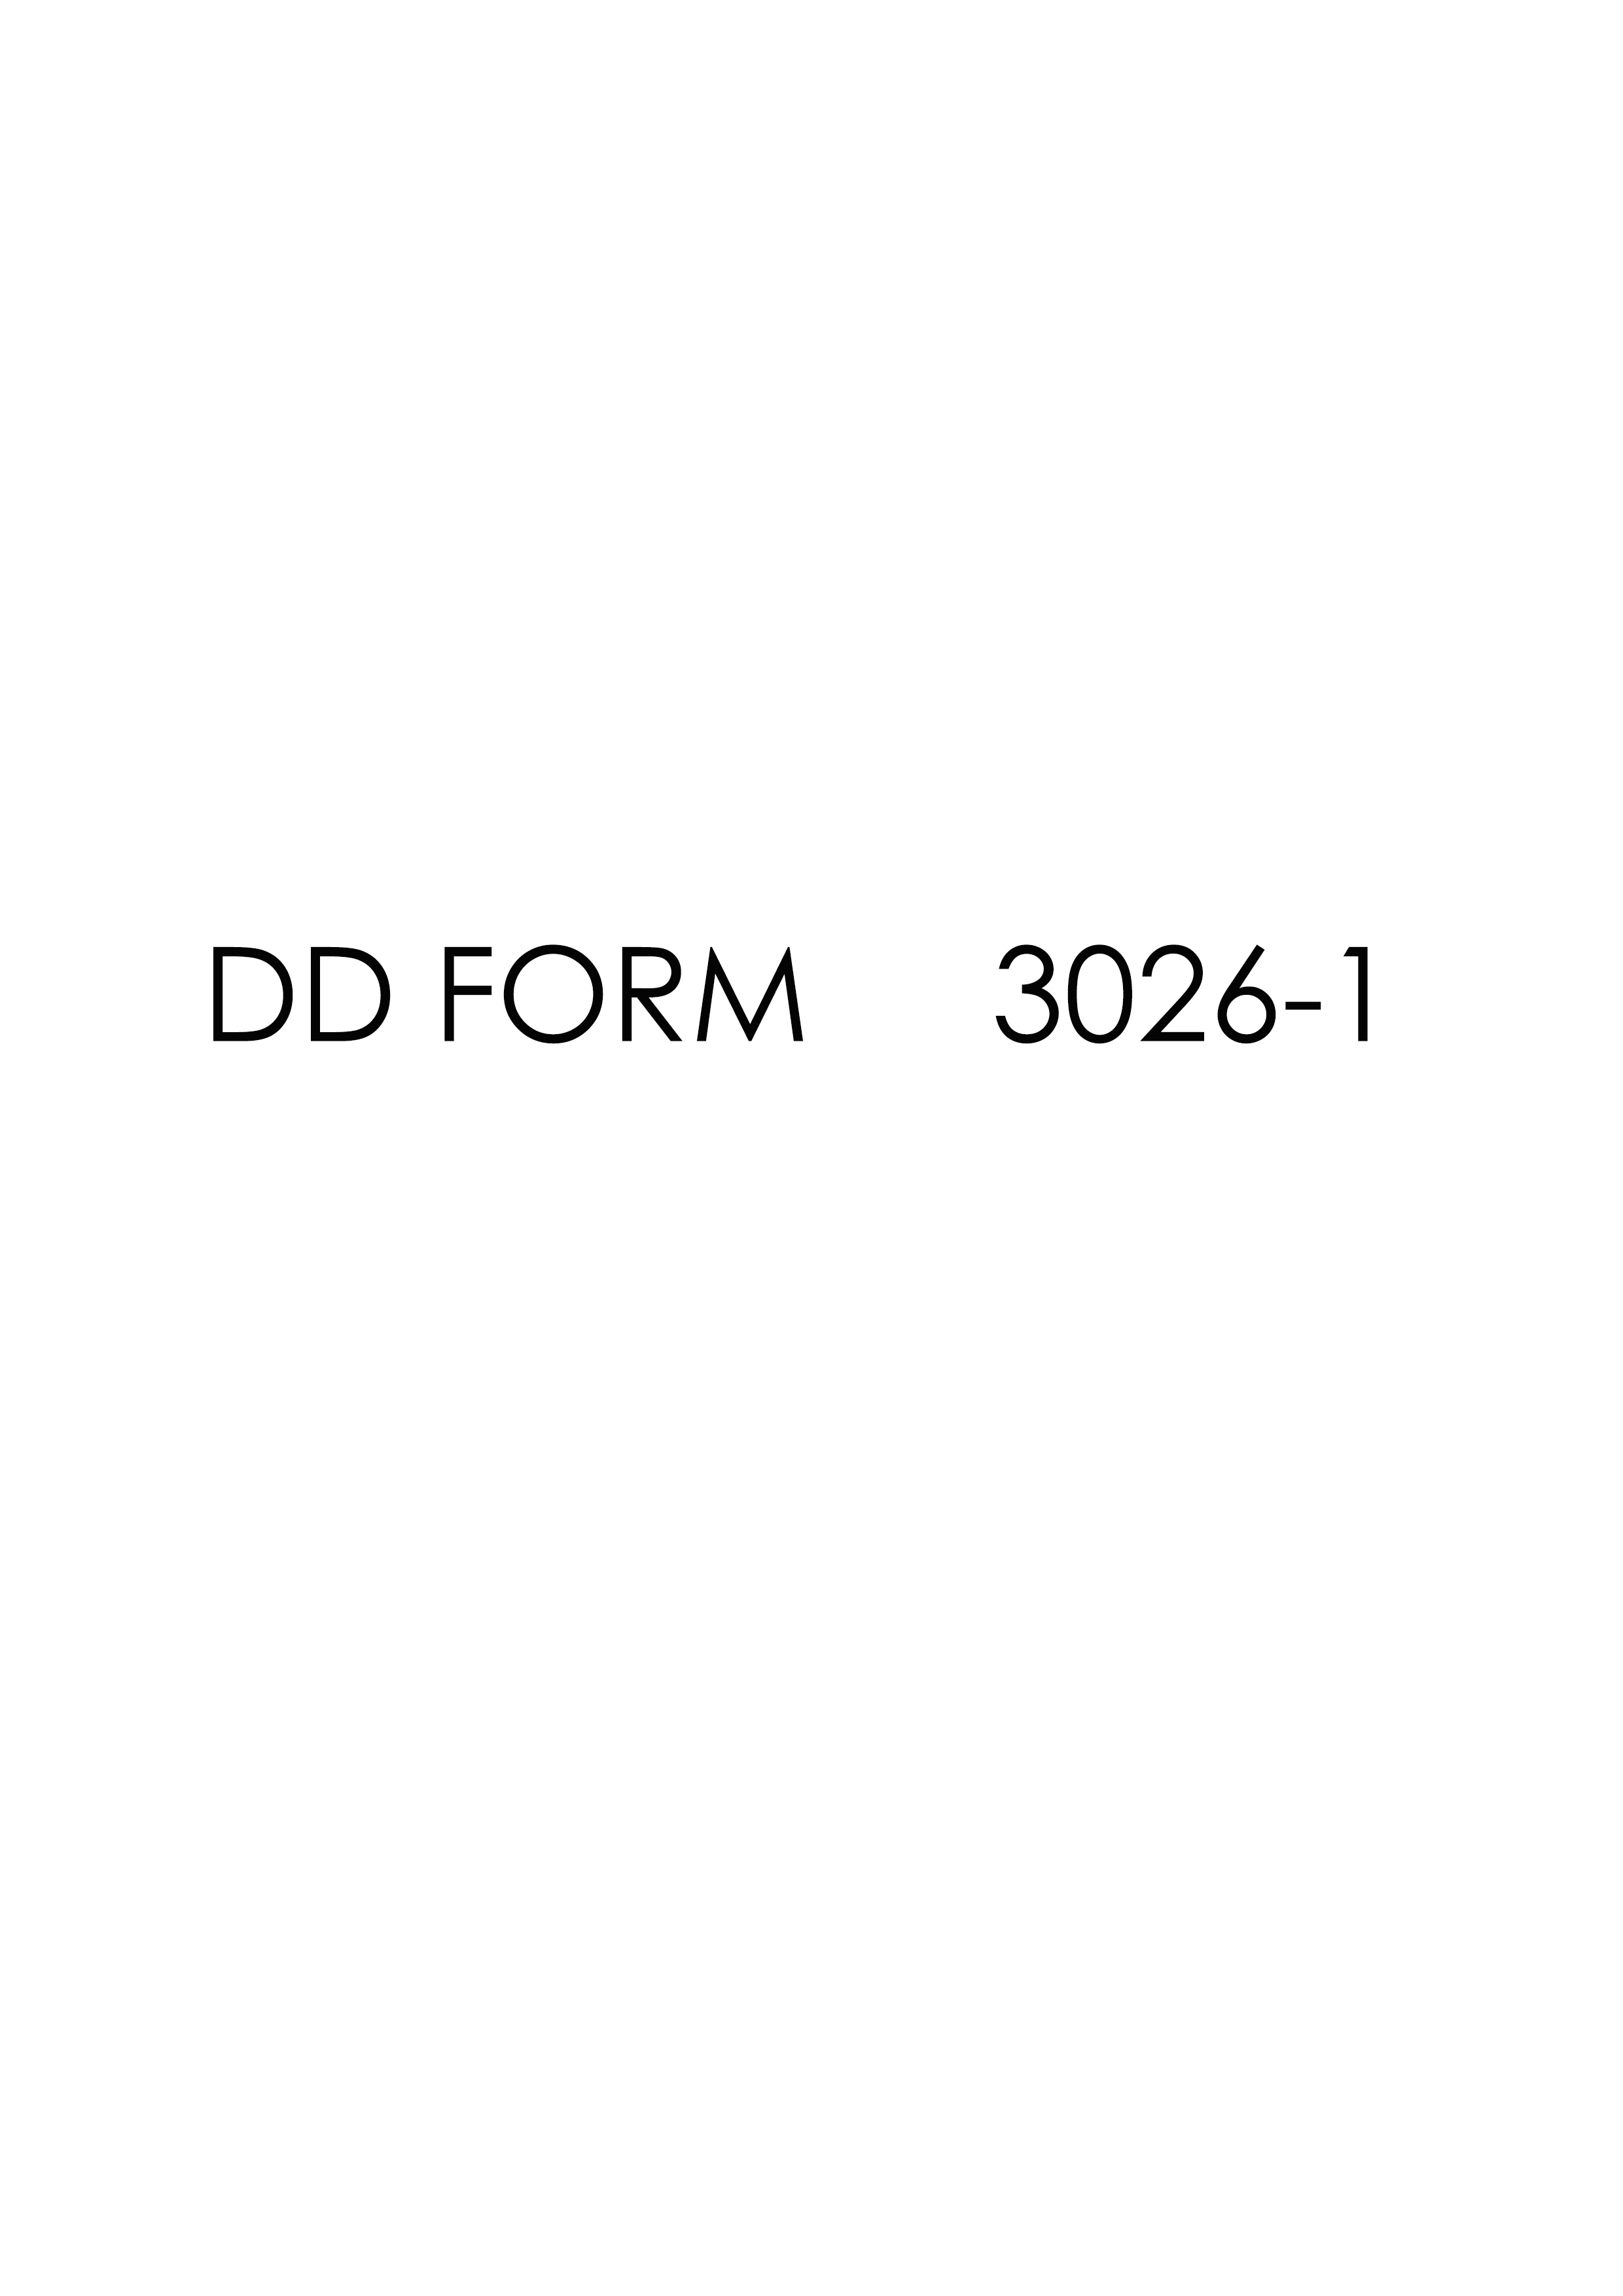 Download Fillable dd Form 3026-1